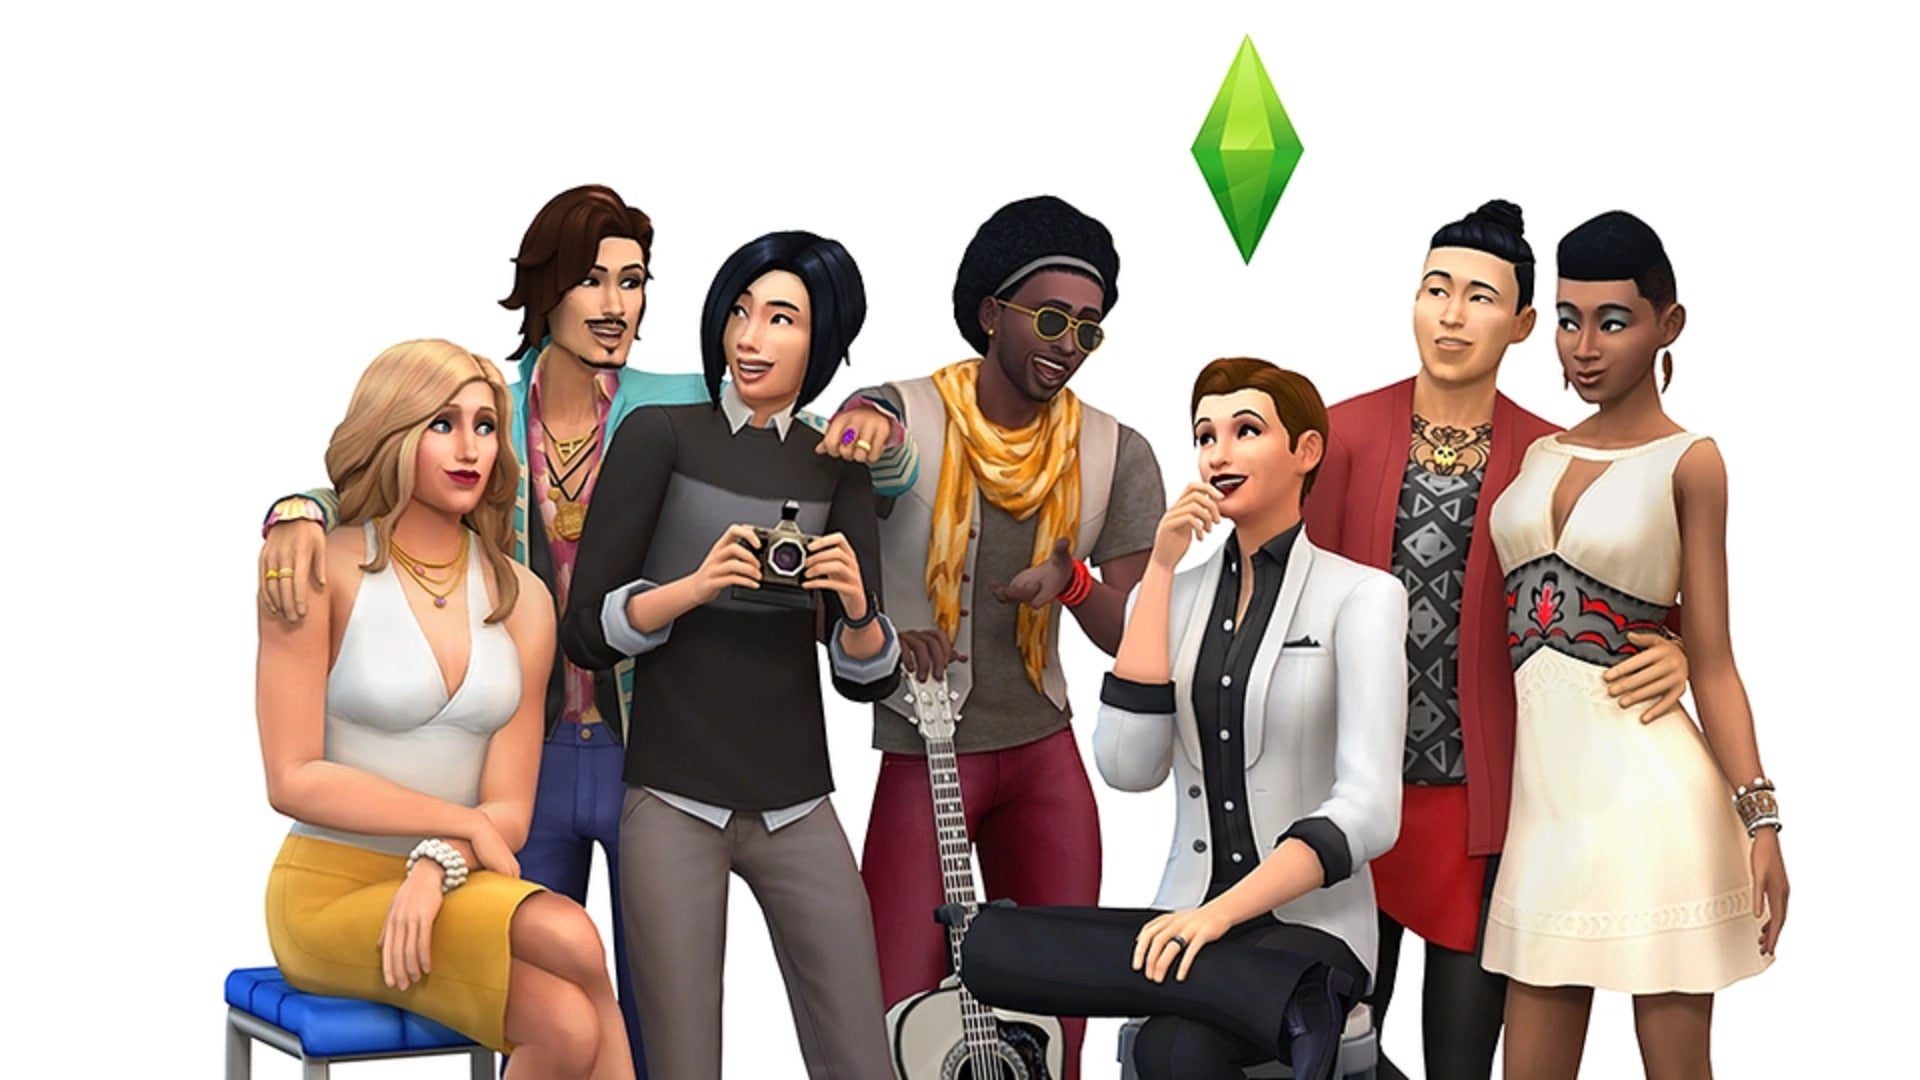 The Sims 4 gender and sexual orientation customisation Rock Paper Shotgun photo